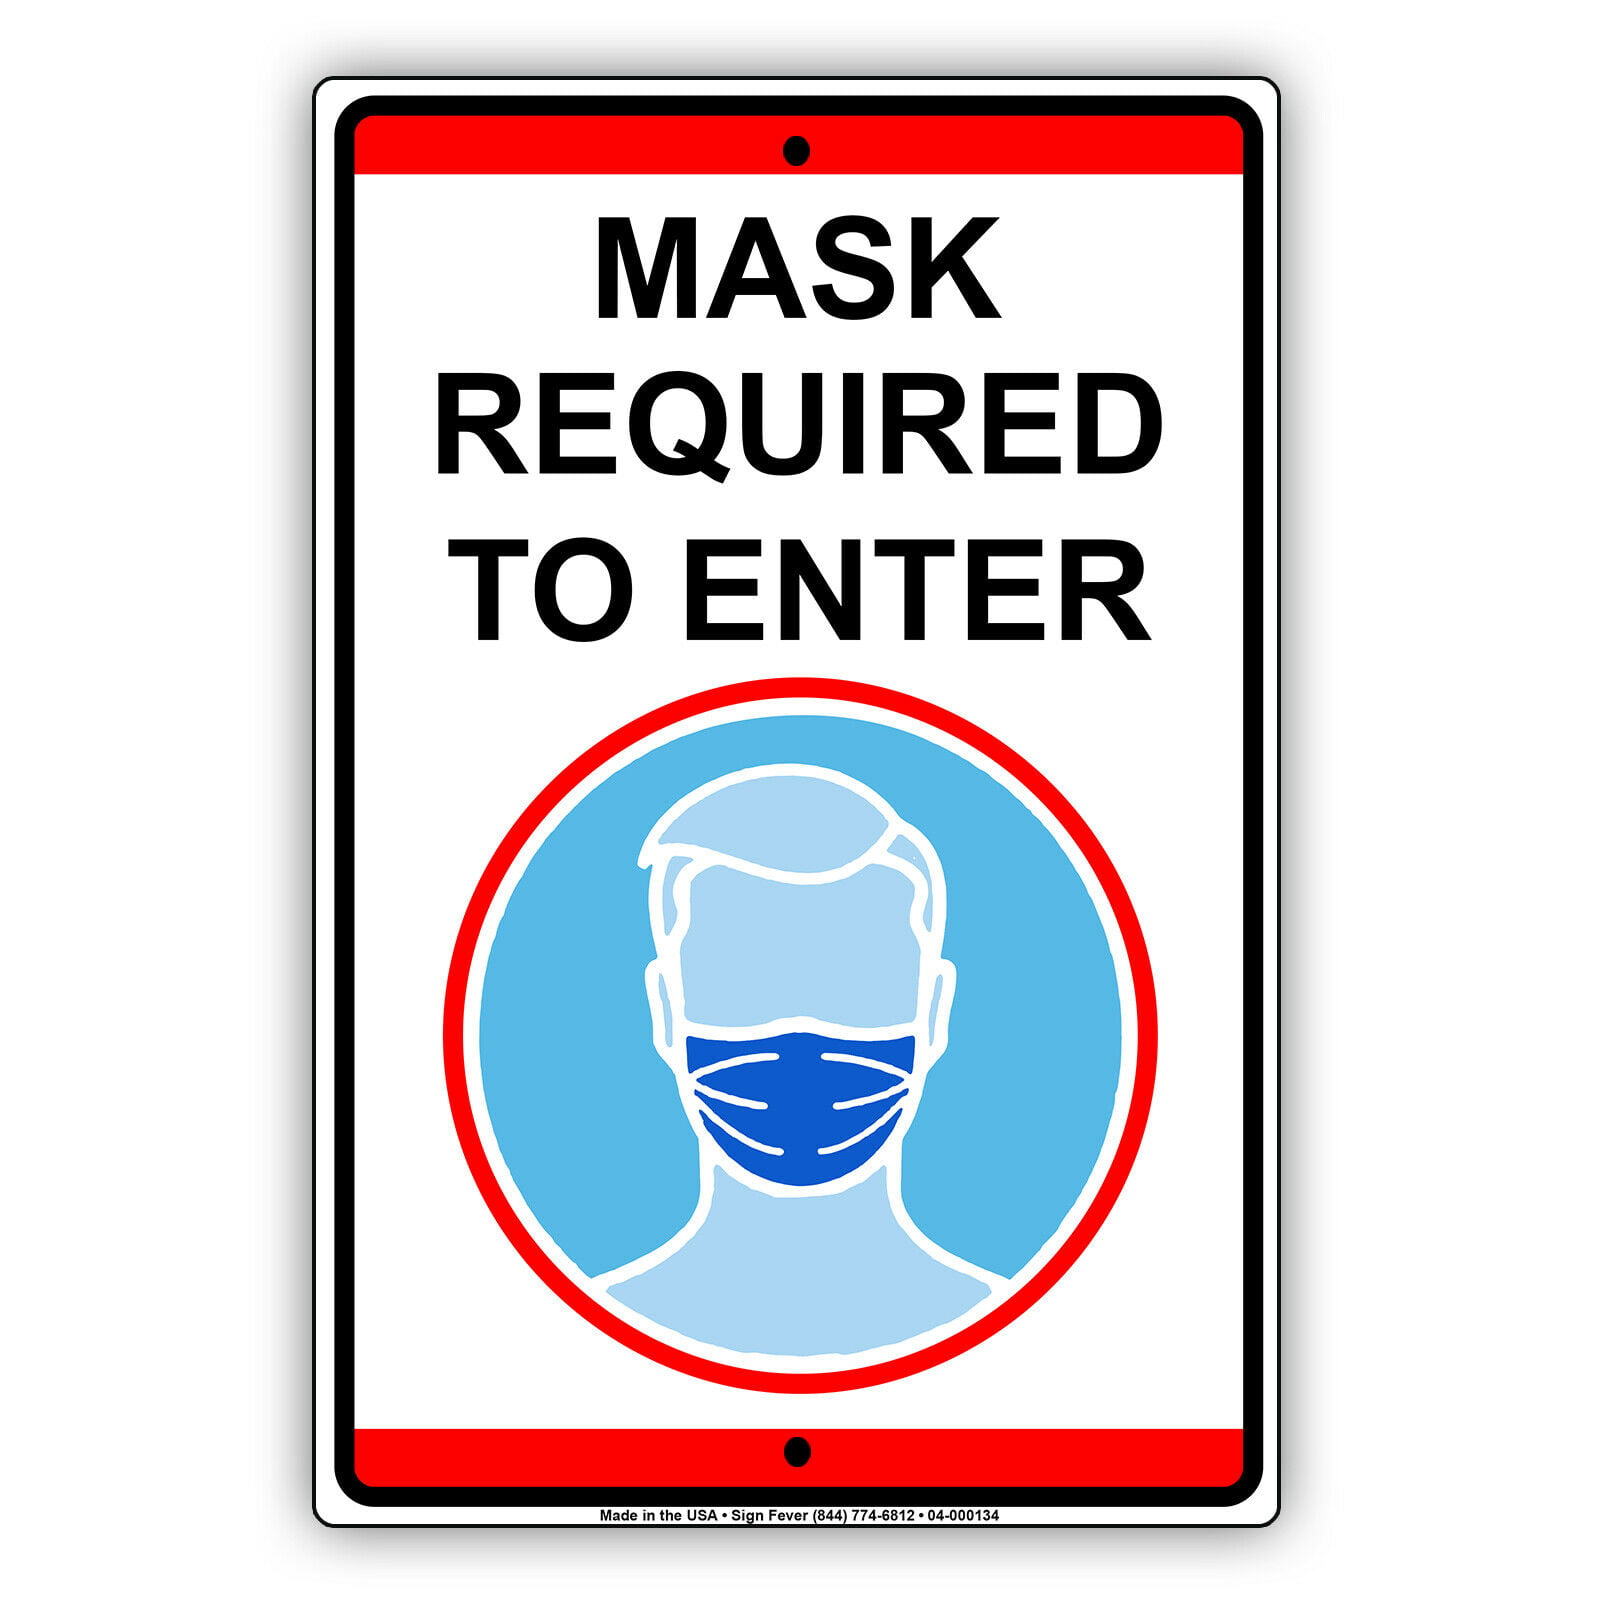 Mask Required To Enter Safety Precautions For Door Or ...